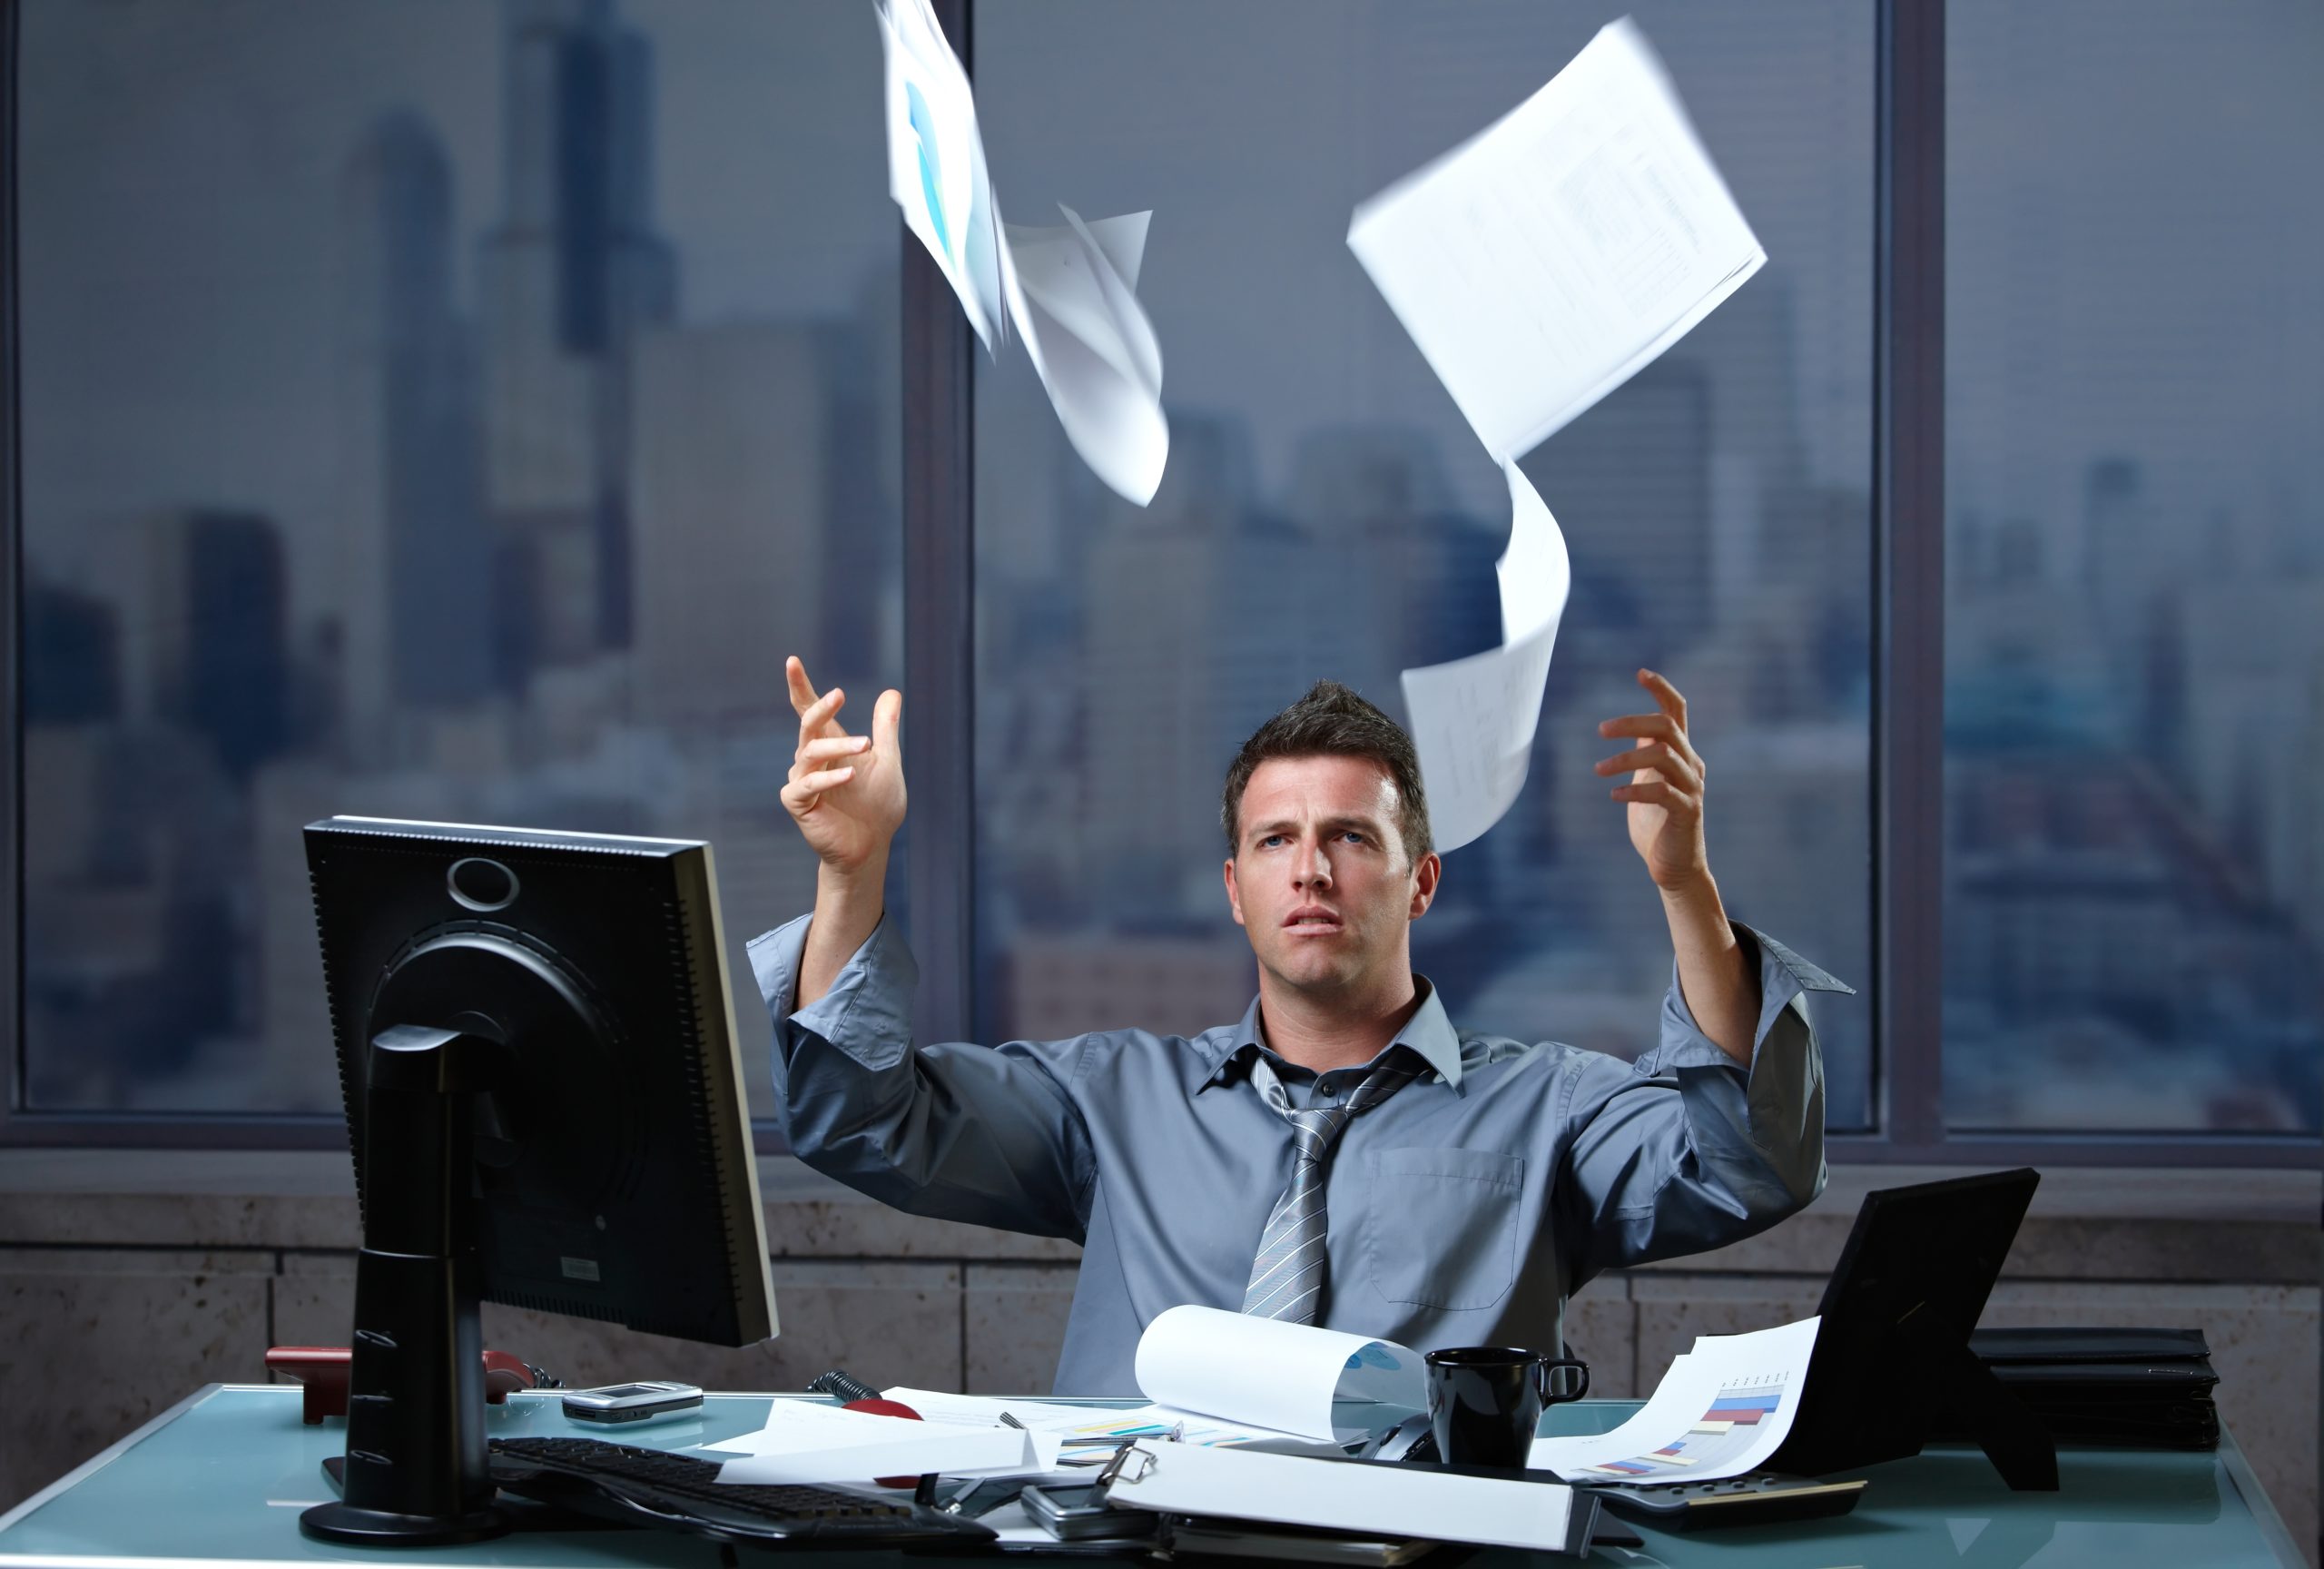 Exhausted professinal throwing documents into air sitting at office desk in overtime.